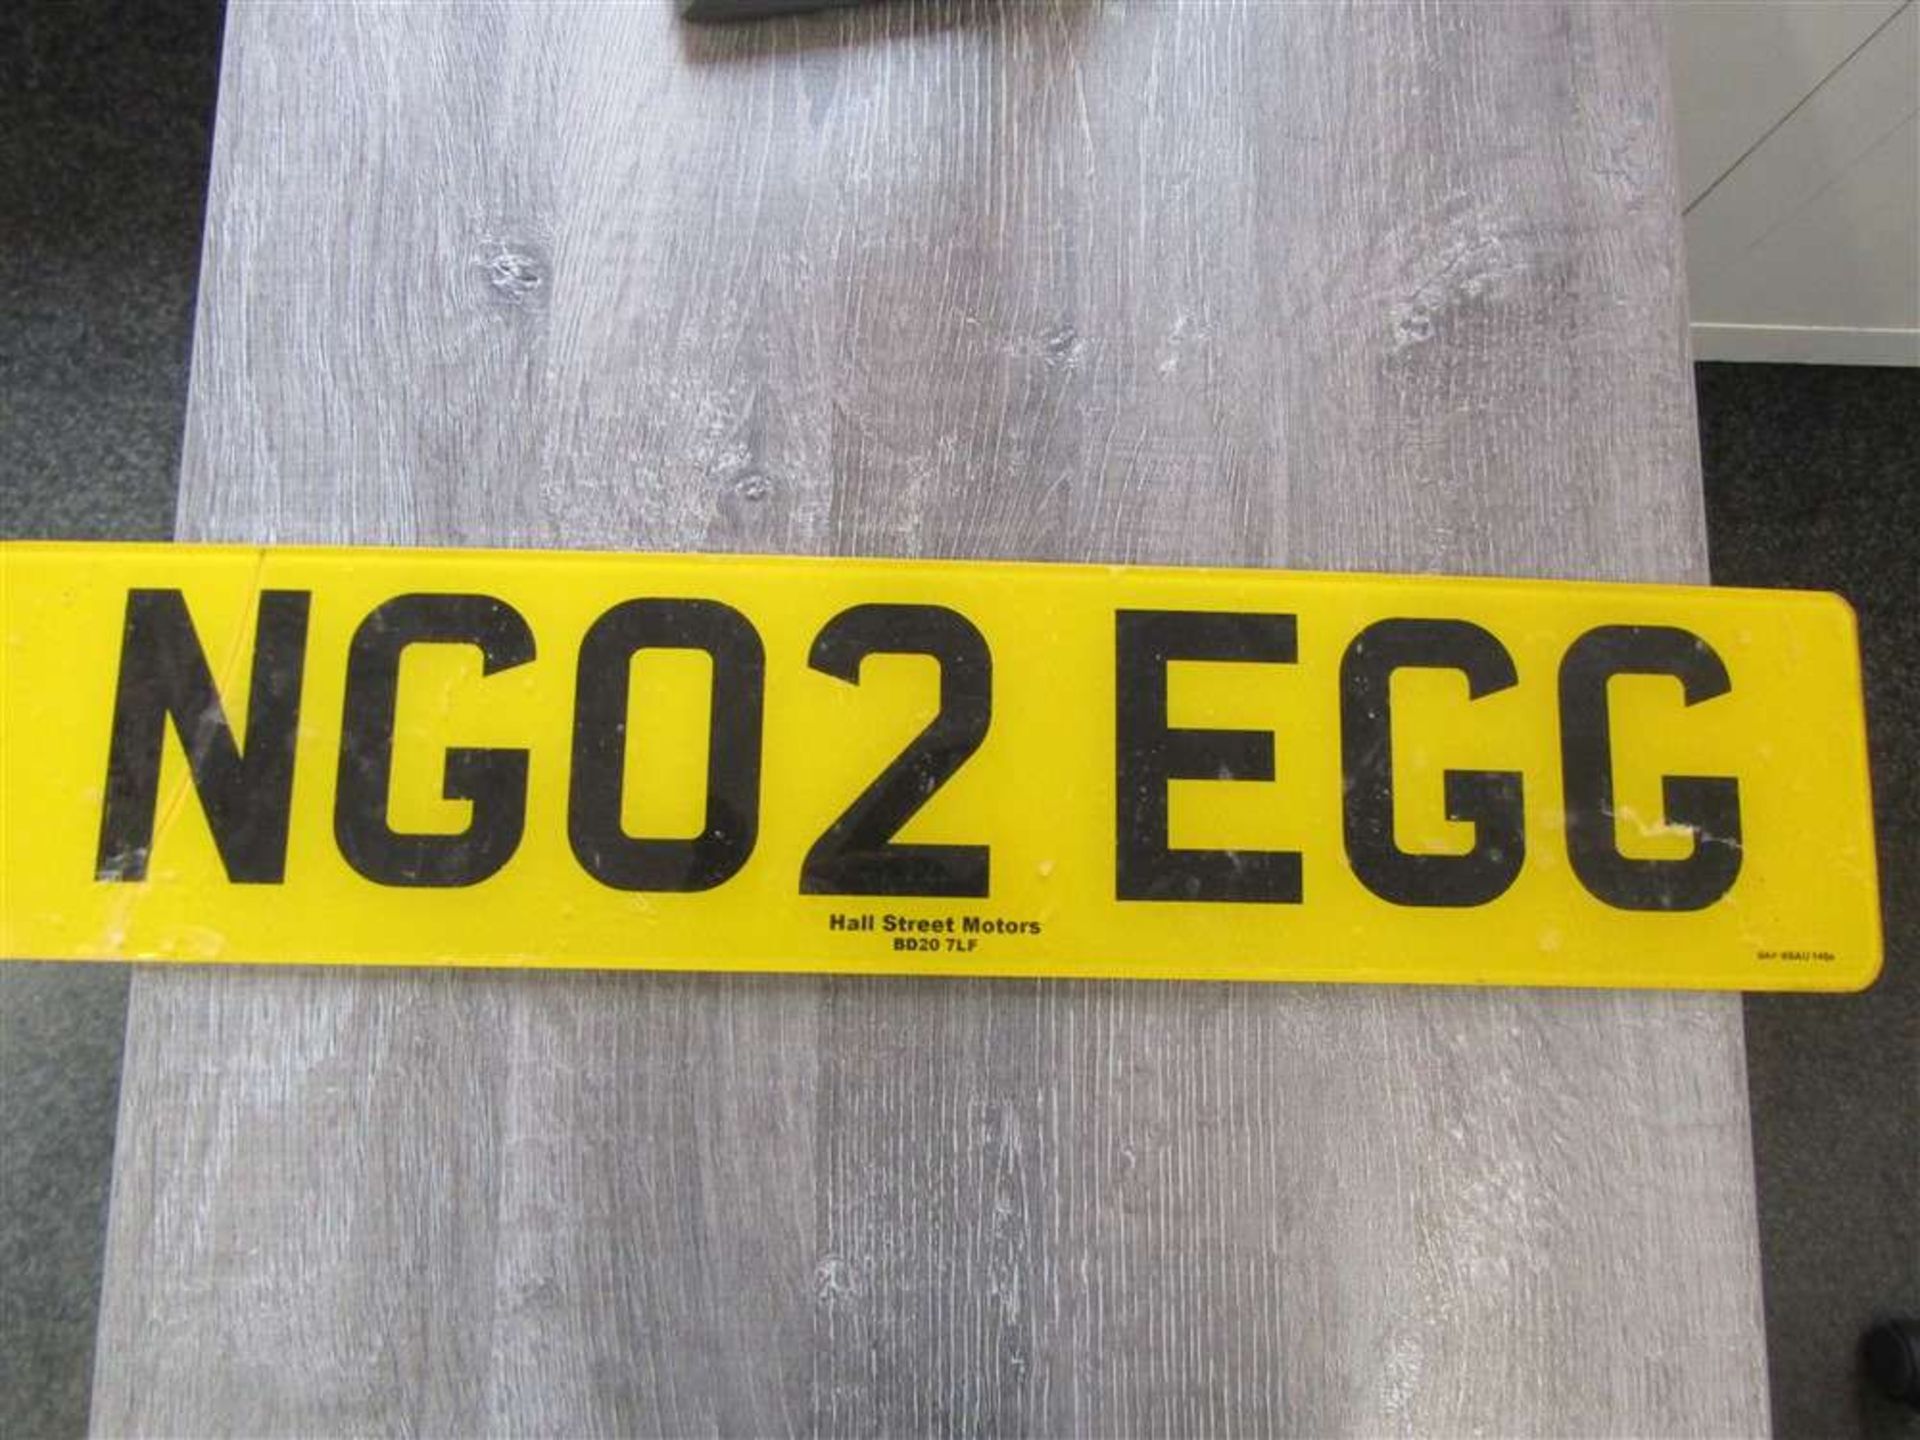 NG02 EGG - Private Registration On Retention Certificate